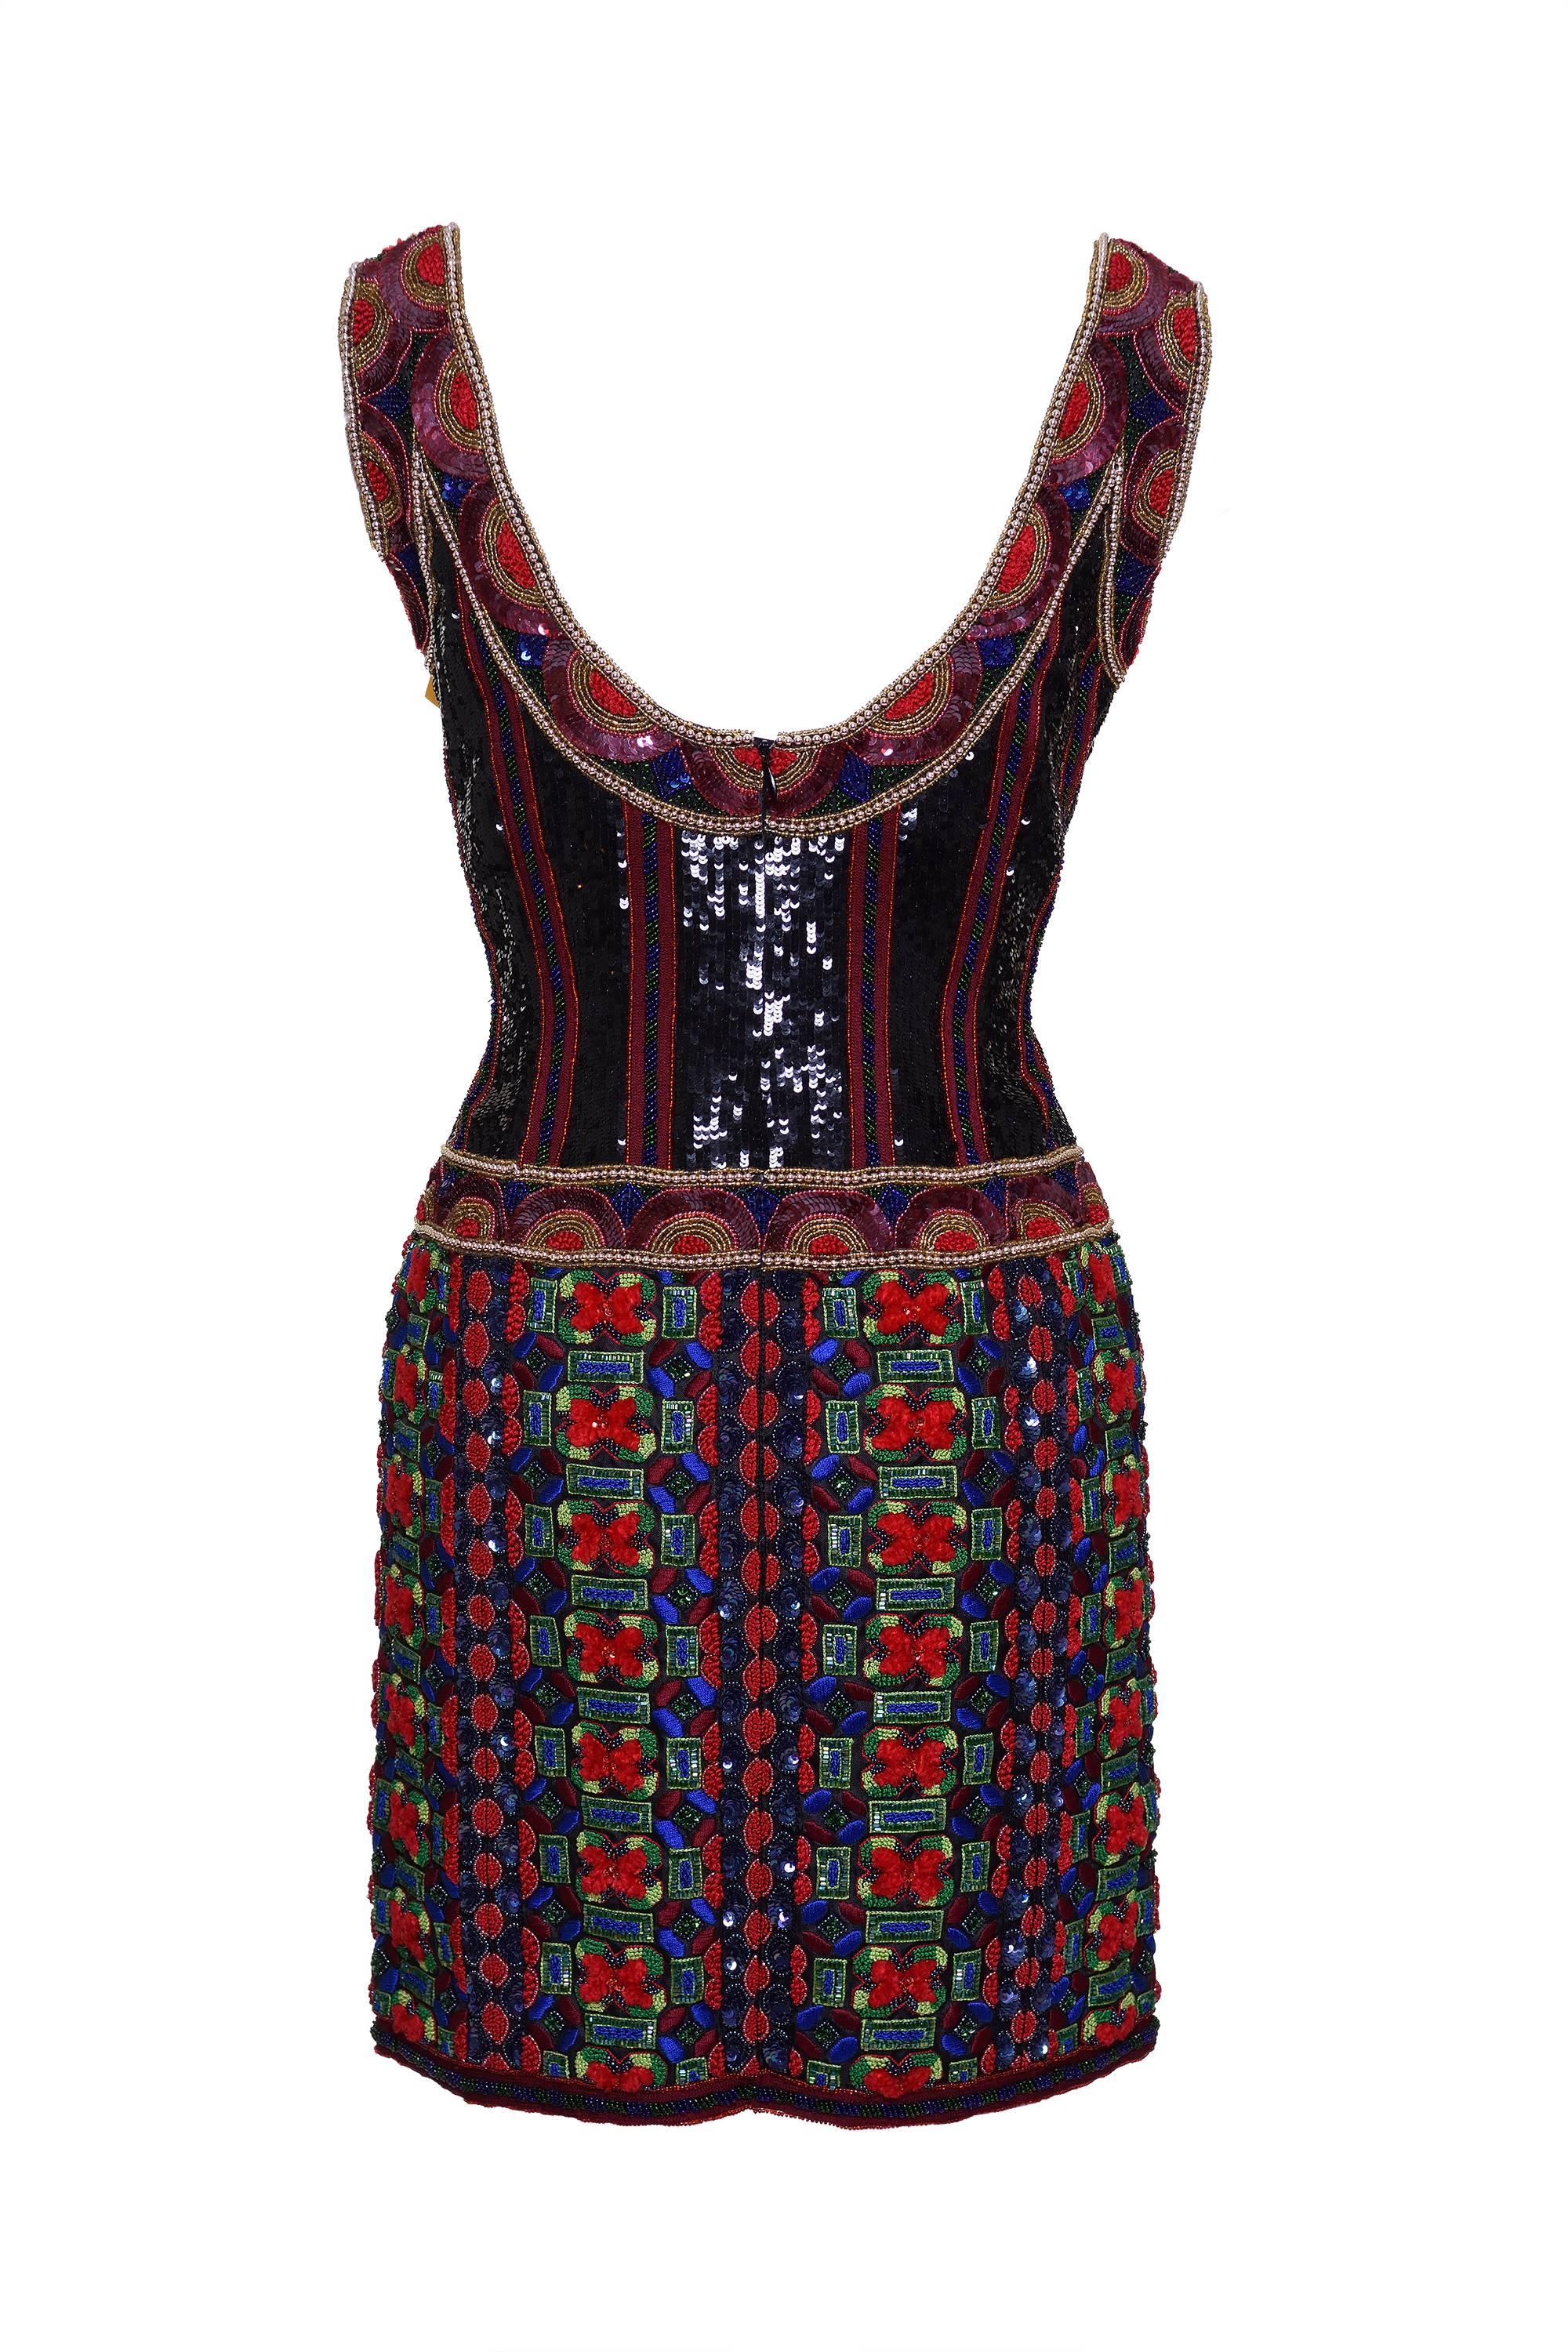 This amazing 1990s embroidered dress by Escada Couture has a special floral and geometric design with pearls, cup sequin, flat sequin, seed bead and seed bugle beads on different colors such as gold, red, blue, green and black on a mix of different